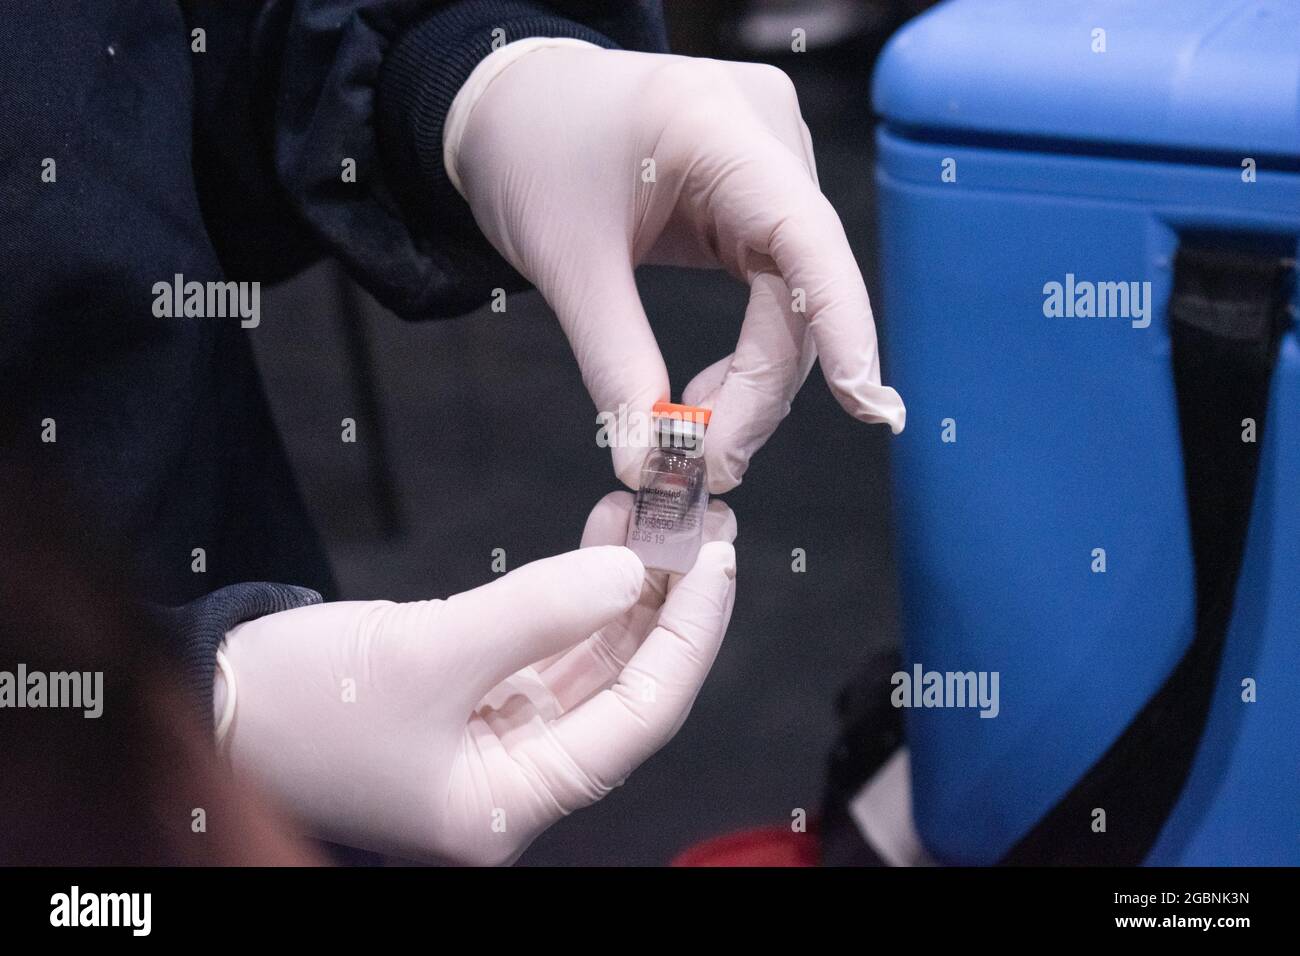 A nurse shows the vial of SINOVAC CoronaVac COVID-19 Vaccine as people from ages 25 to 30 start their vaccination phase with the Moderna novel COVID-19 vaccine against the Coronavirus disease in Bogota, Colombia on August 3, 2021. Stock Photo